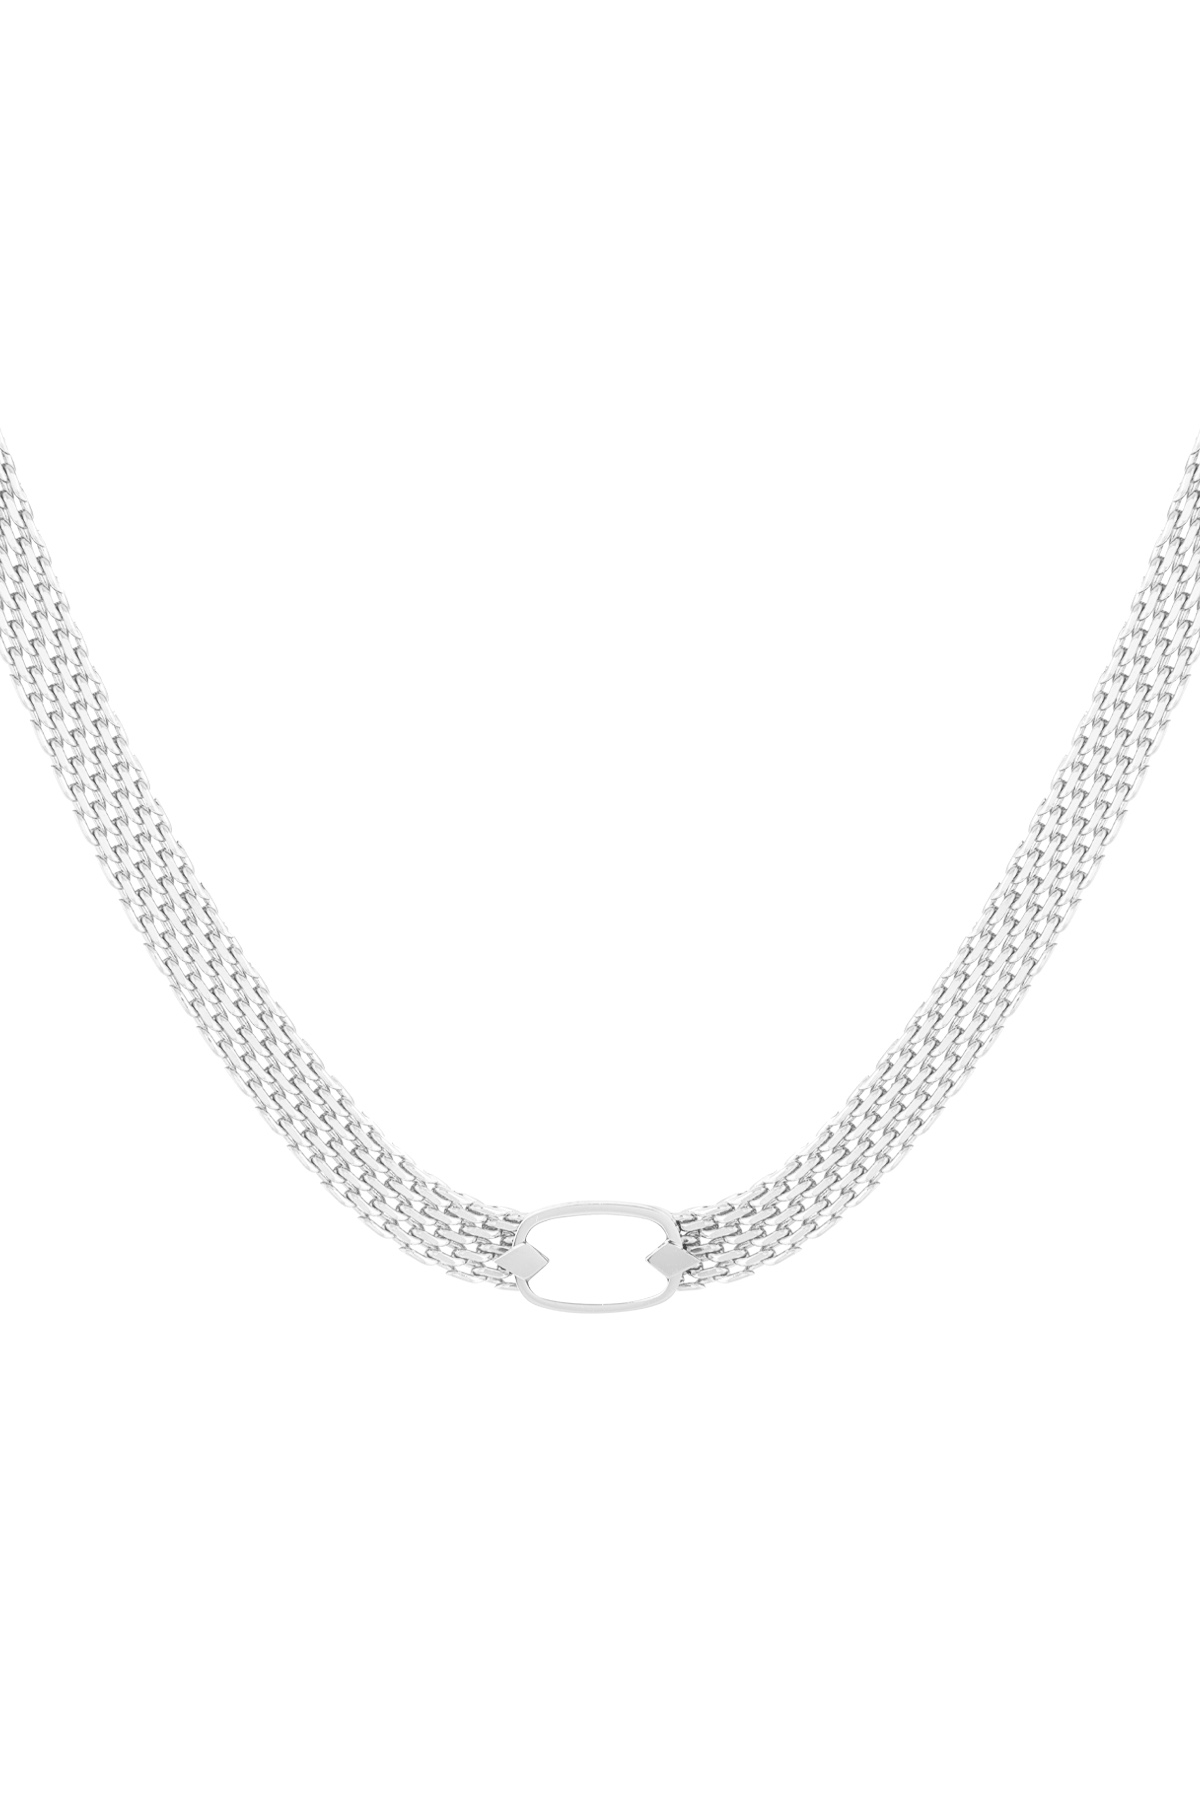 Flat links necklace - silver h5 